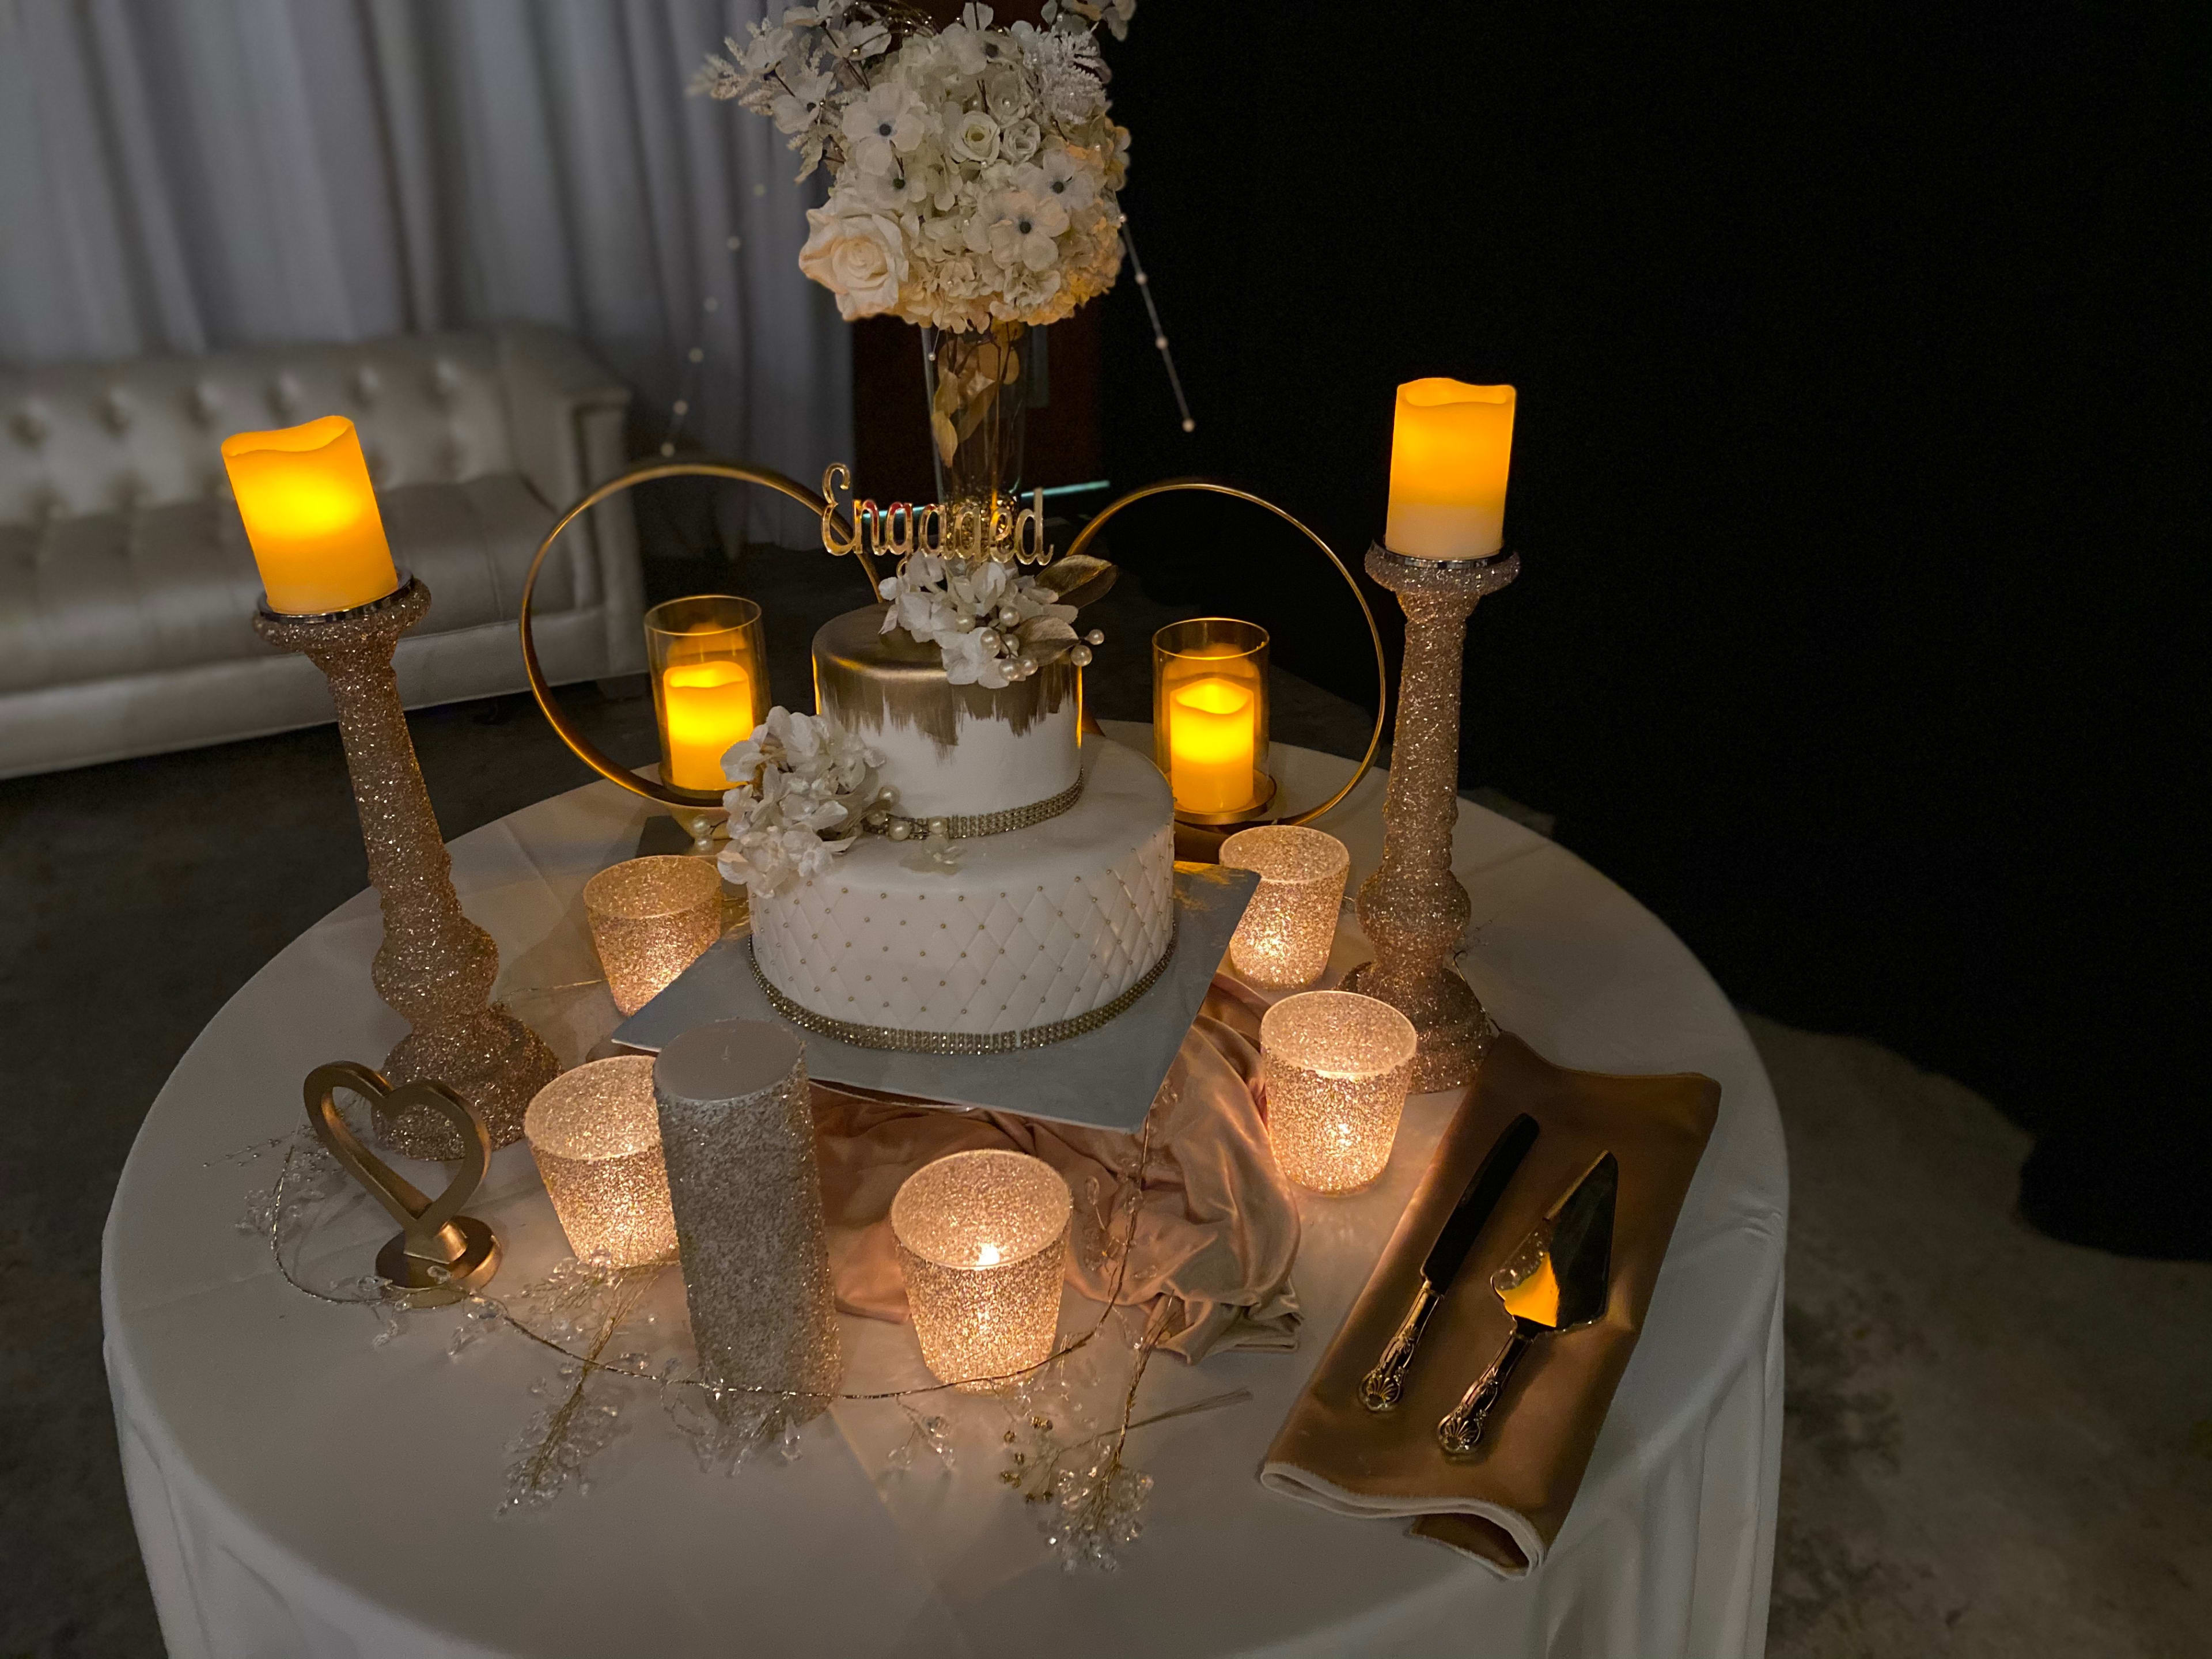 A white cake on a table with lots of candles, perfect for a party or engagement celebration.